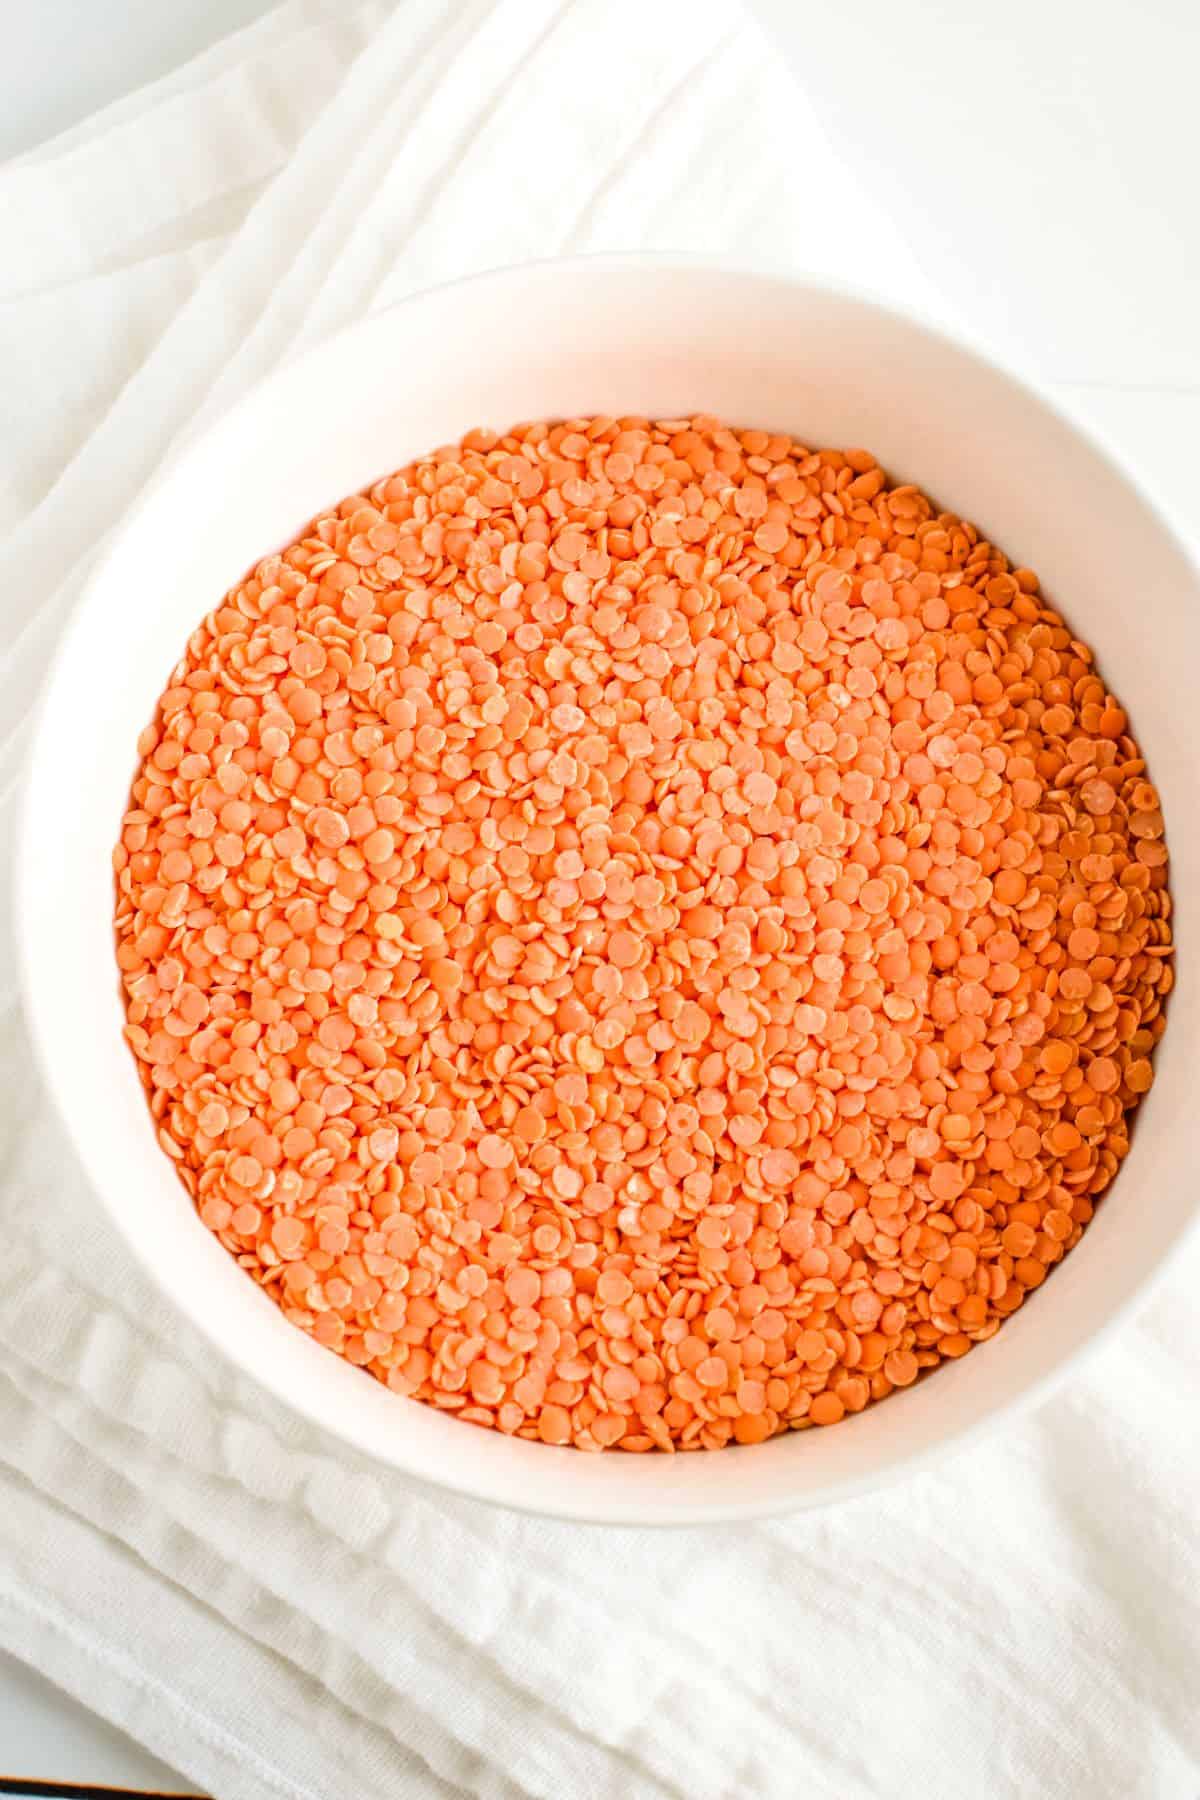 How Cook Red Lentils - Watch